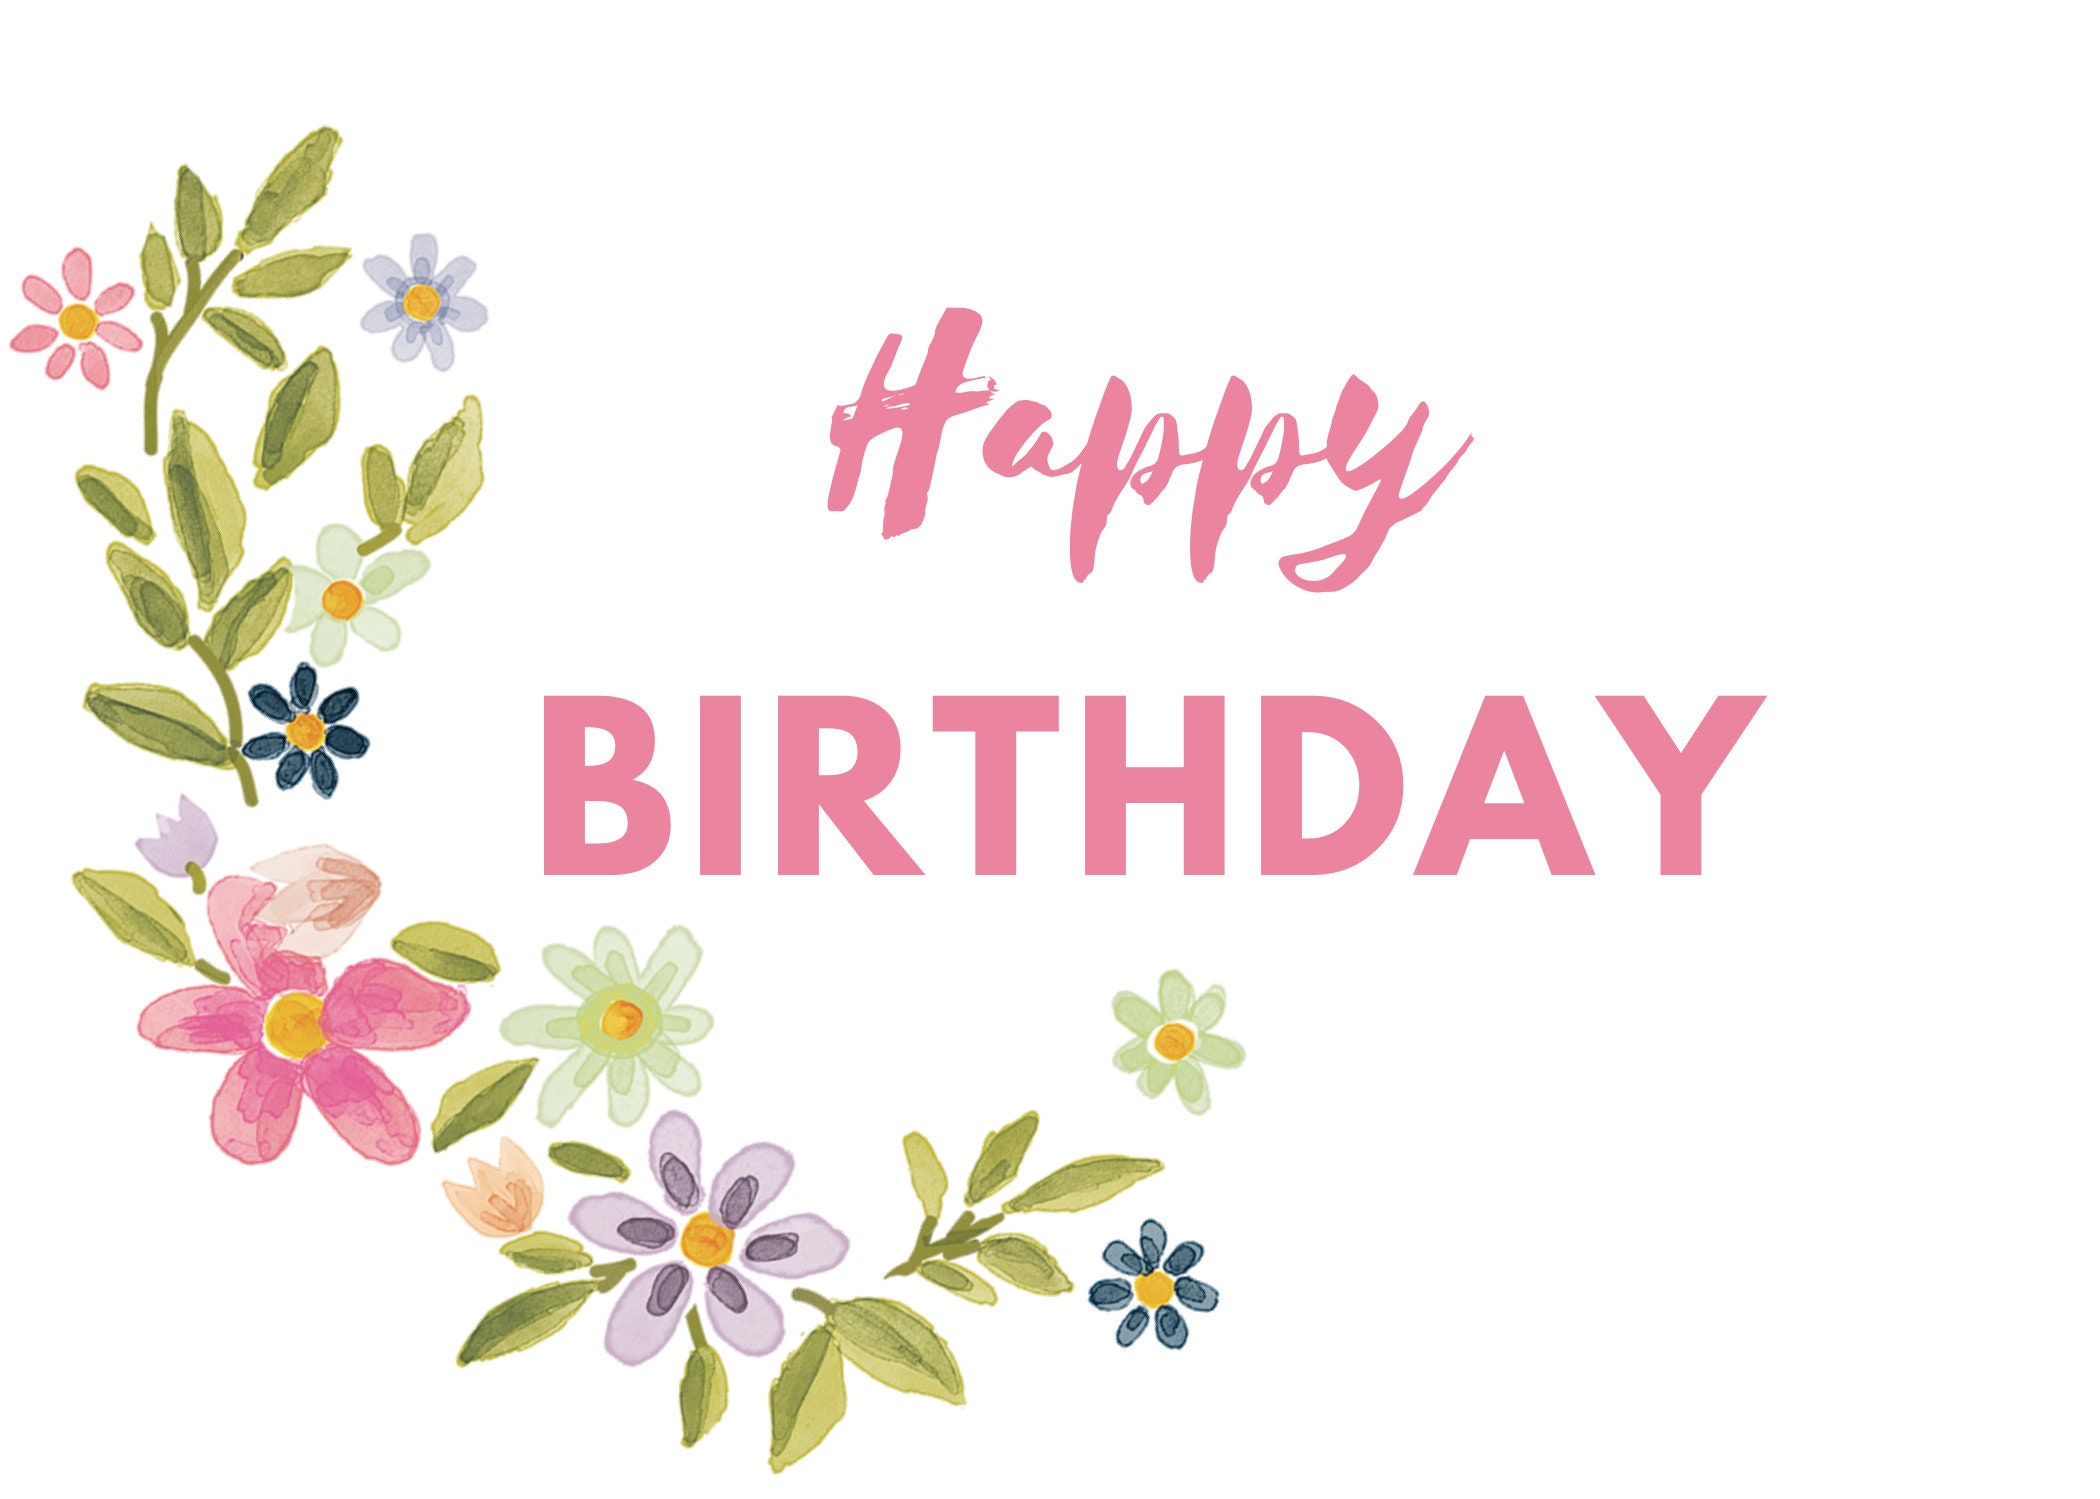 Happy Birthday Card With Pink Text and Floral Design - Etsy